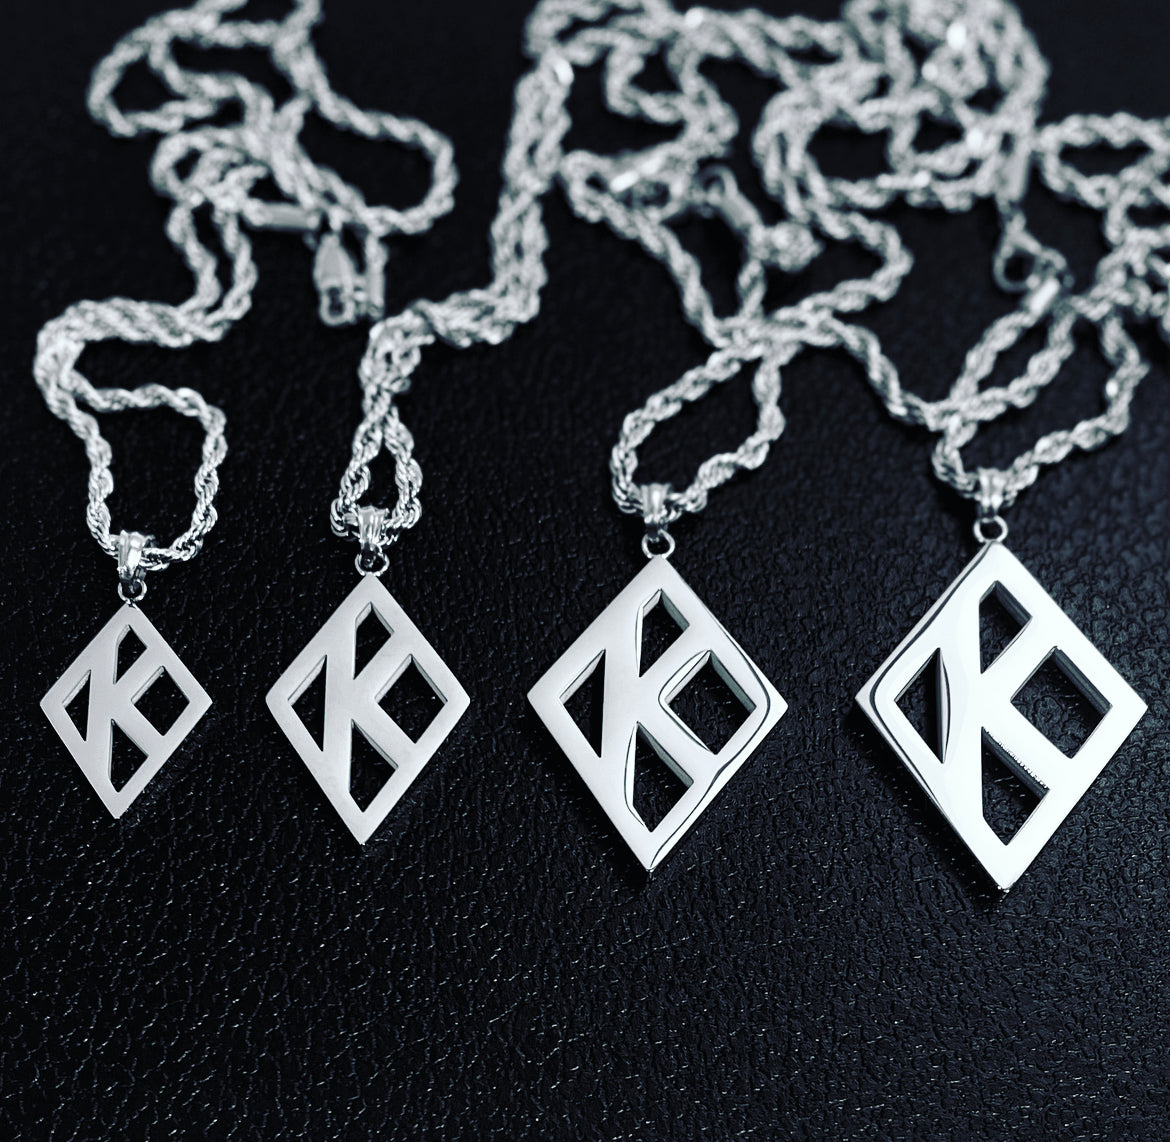 Buy Bts Necklace Online In India - Etsy India